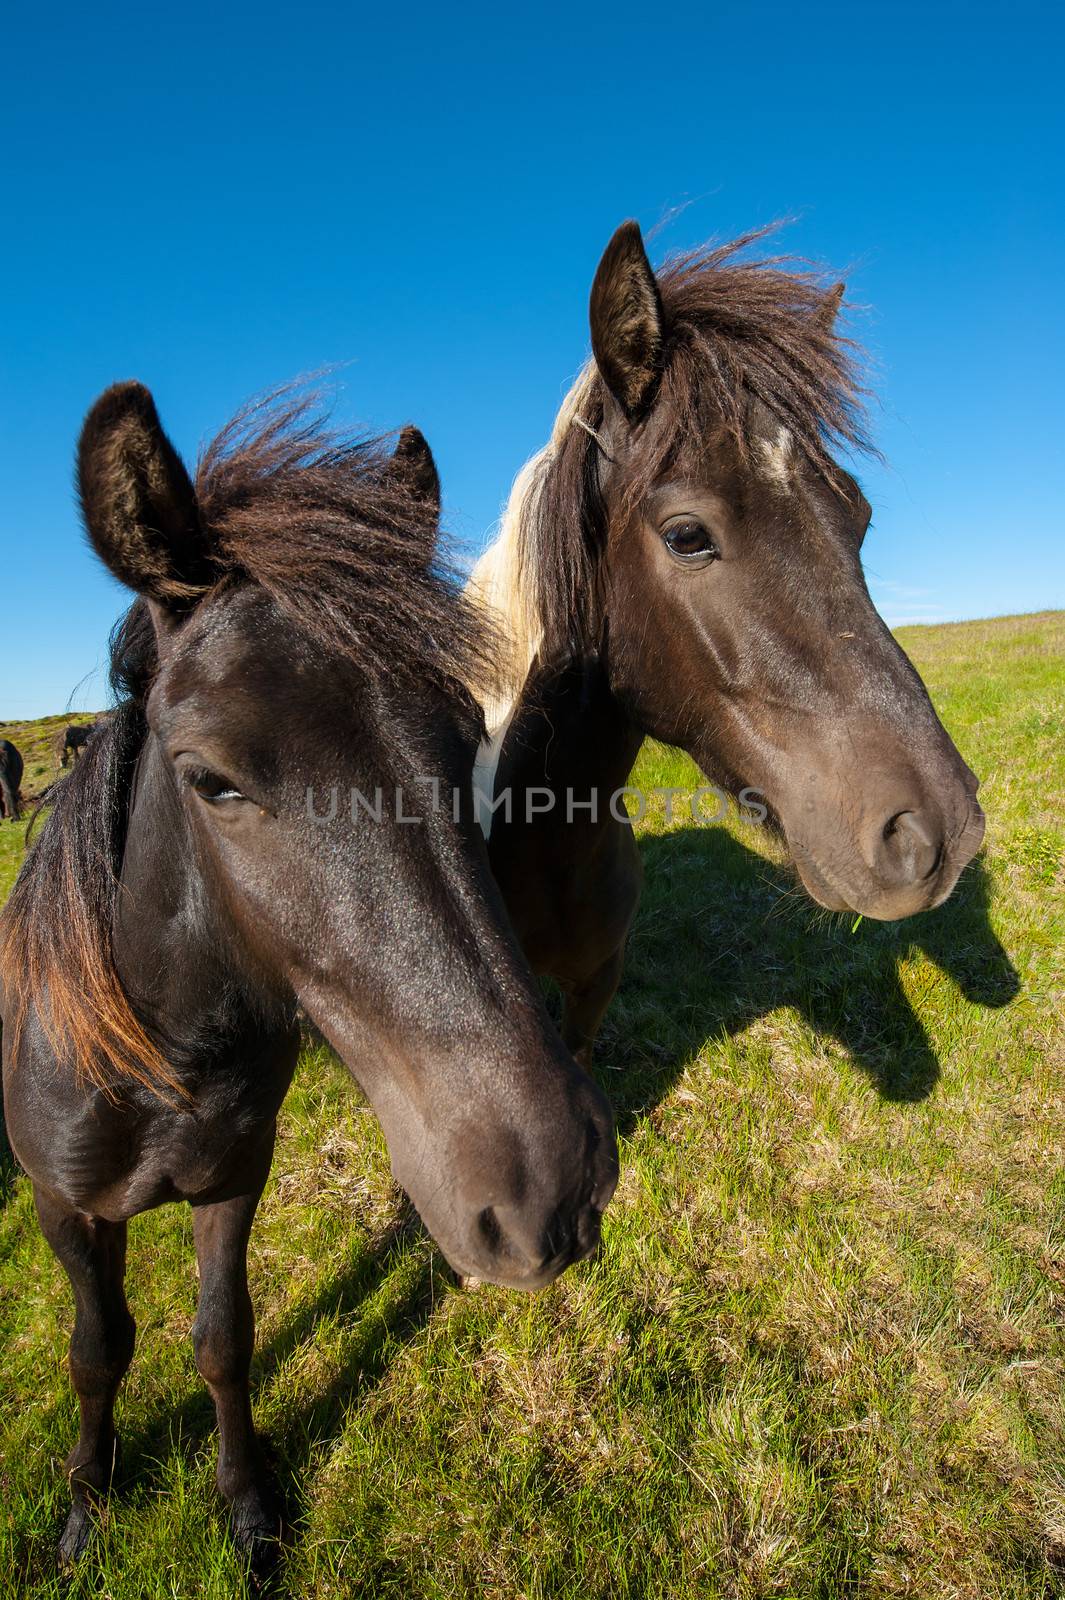 Icelandic horses are rather small and very beautiful. The breed was developed in Iceland and once exported outside the country animals cannot return 